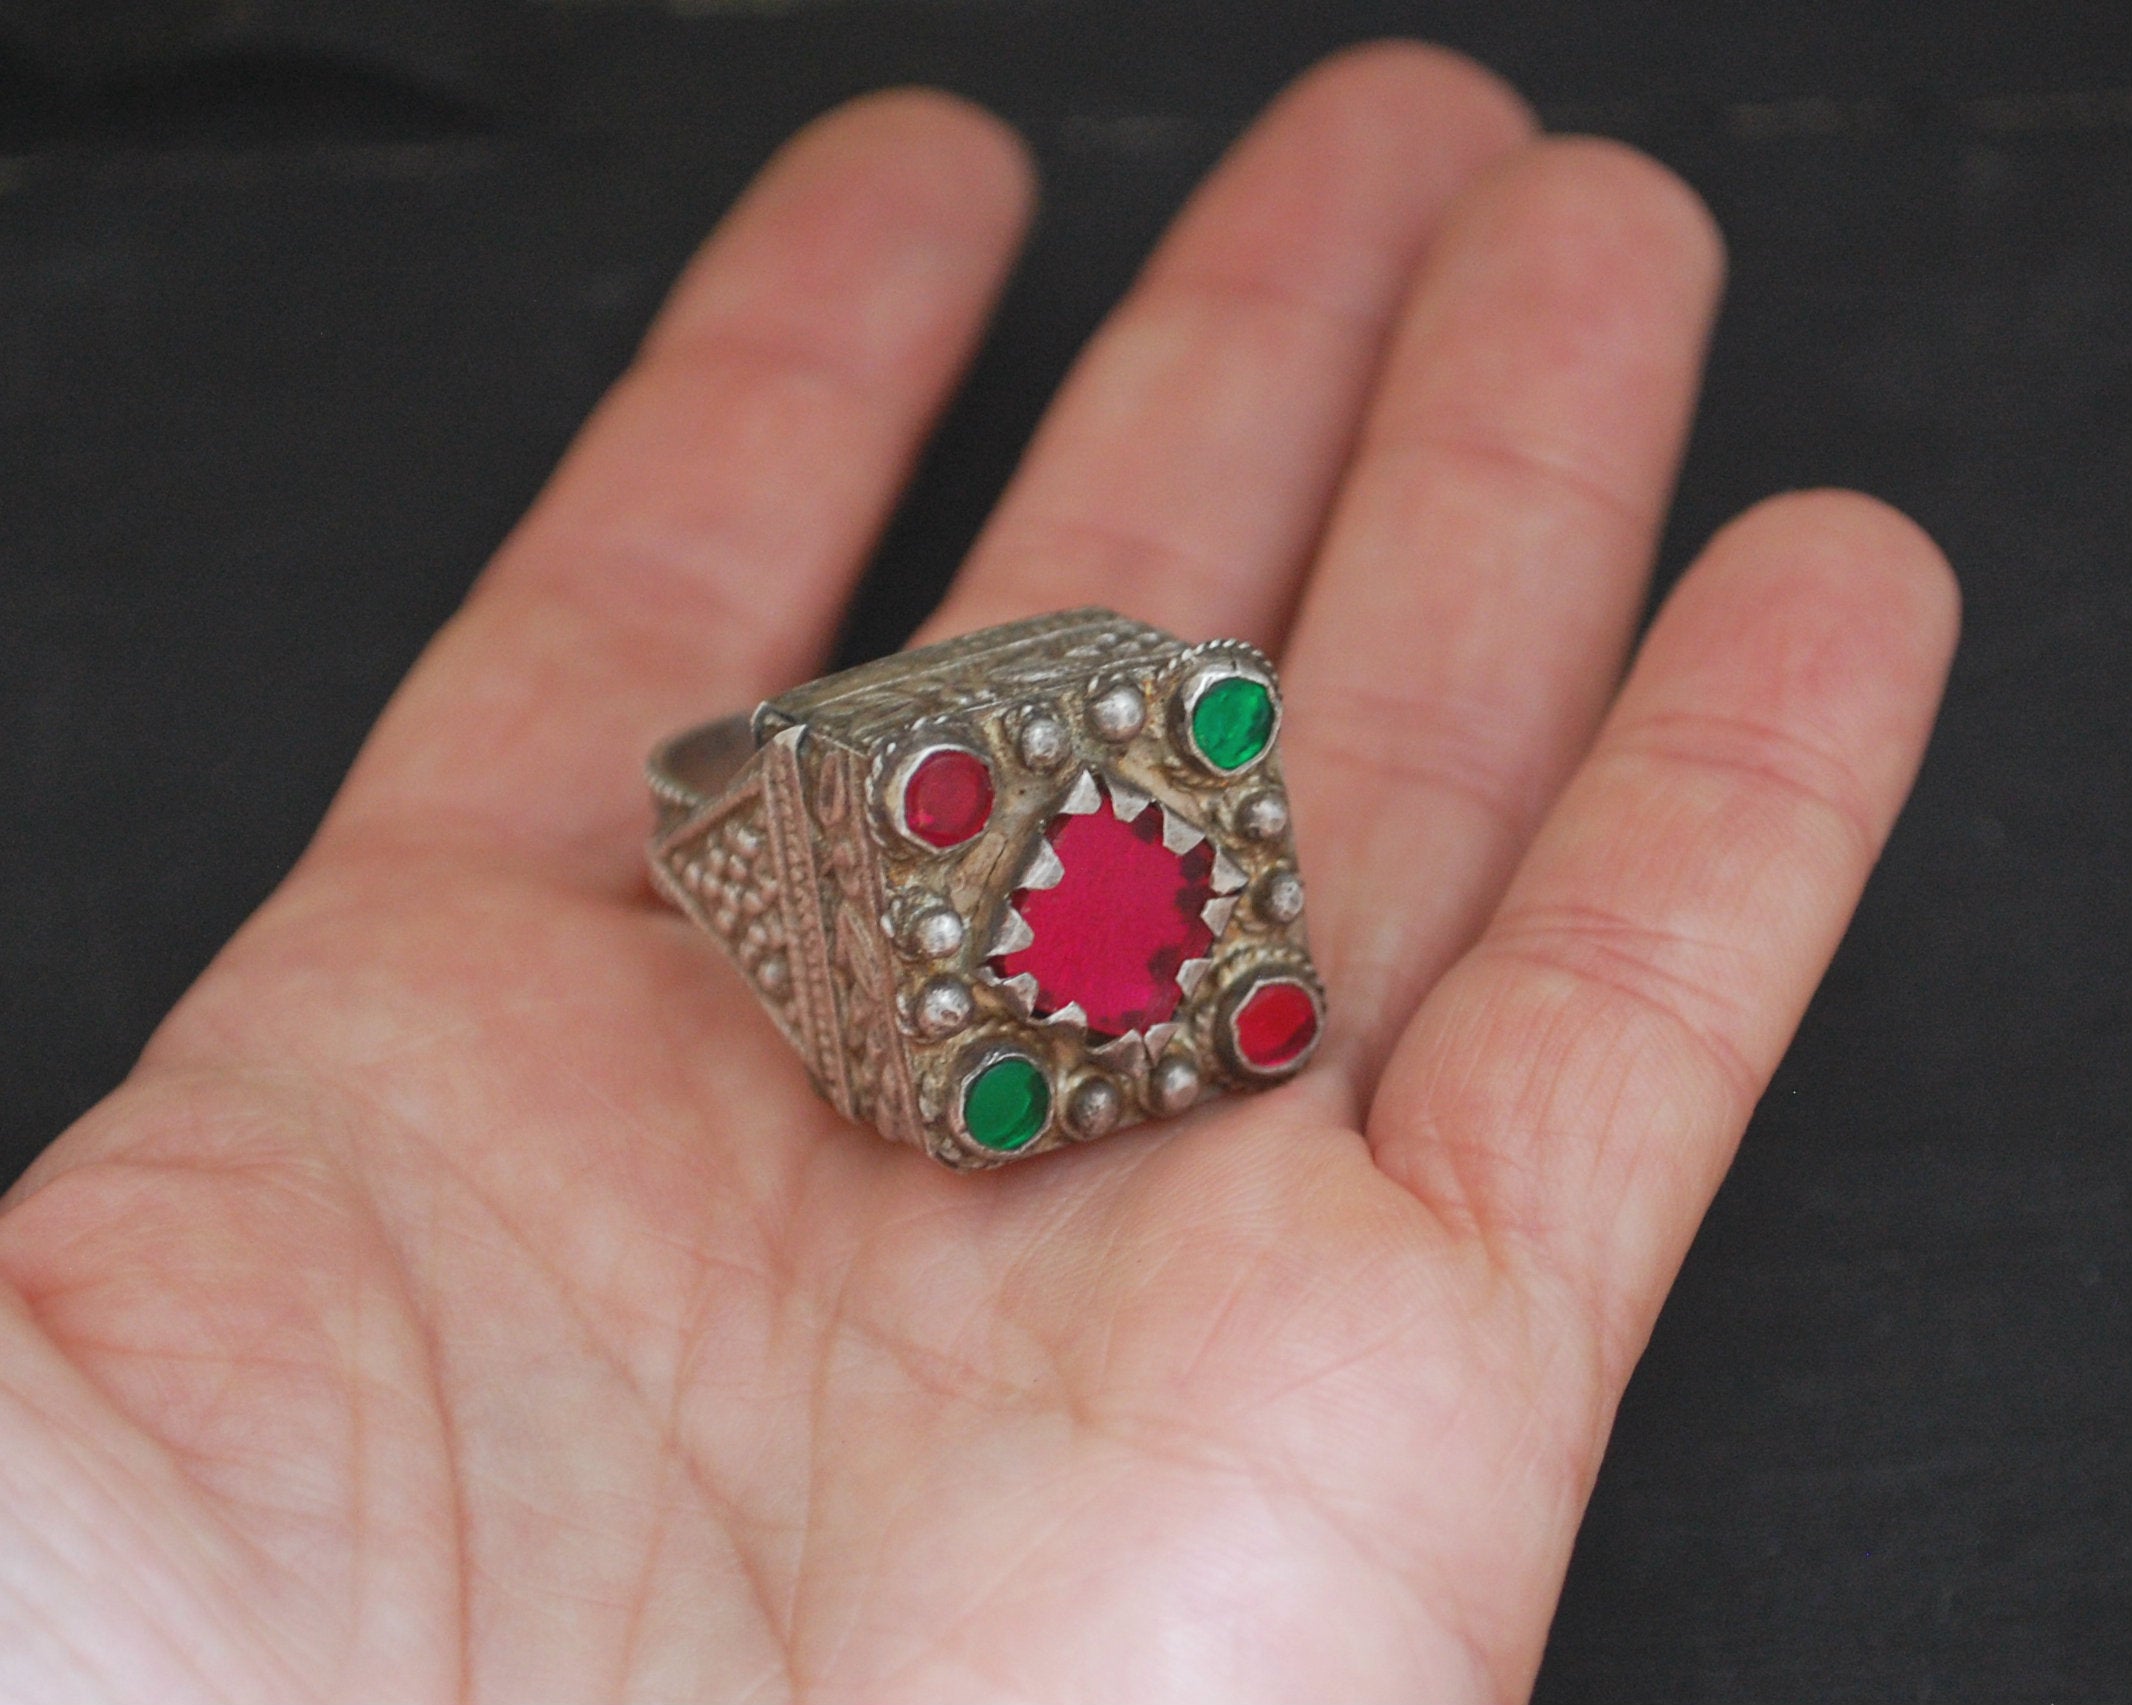 Pashtun Silver Ring with Red Glass - Size 9